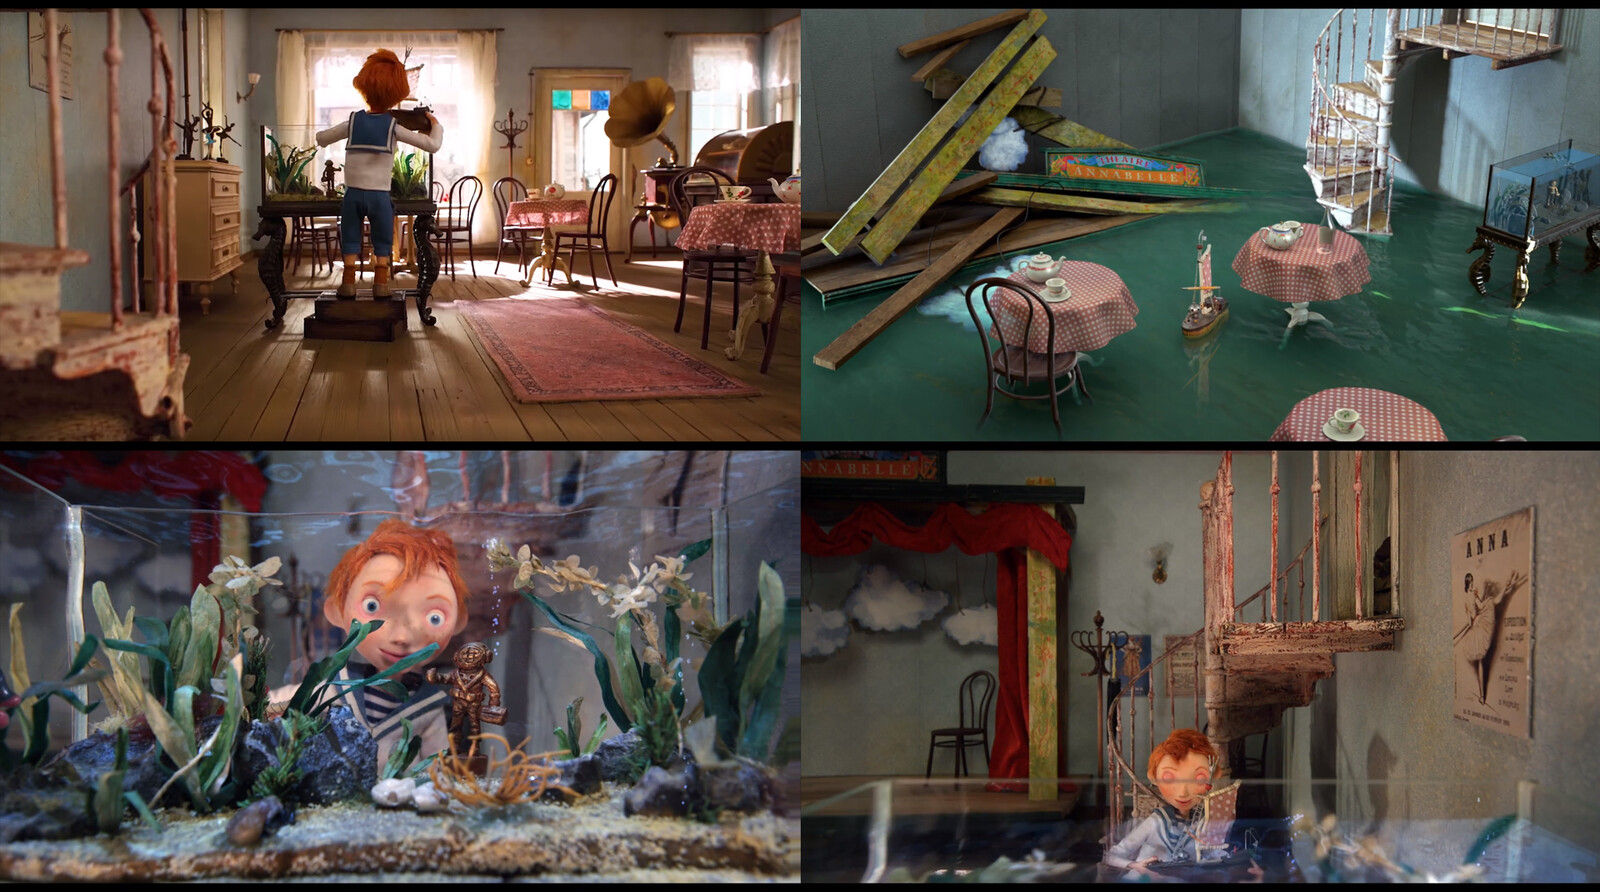 Some images of the real set, second image is a test CG shot